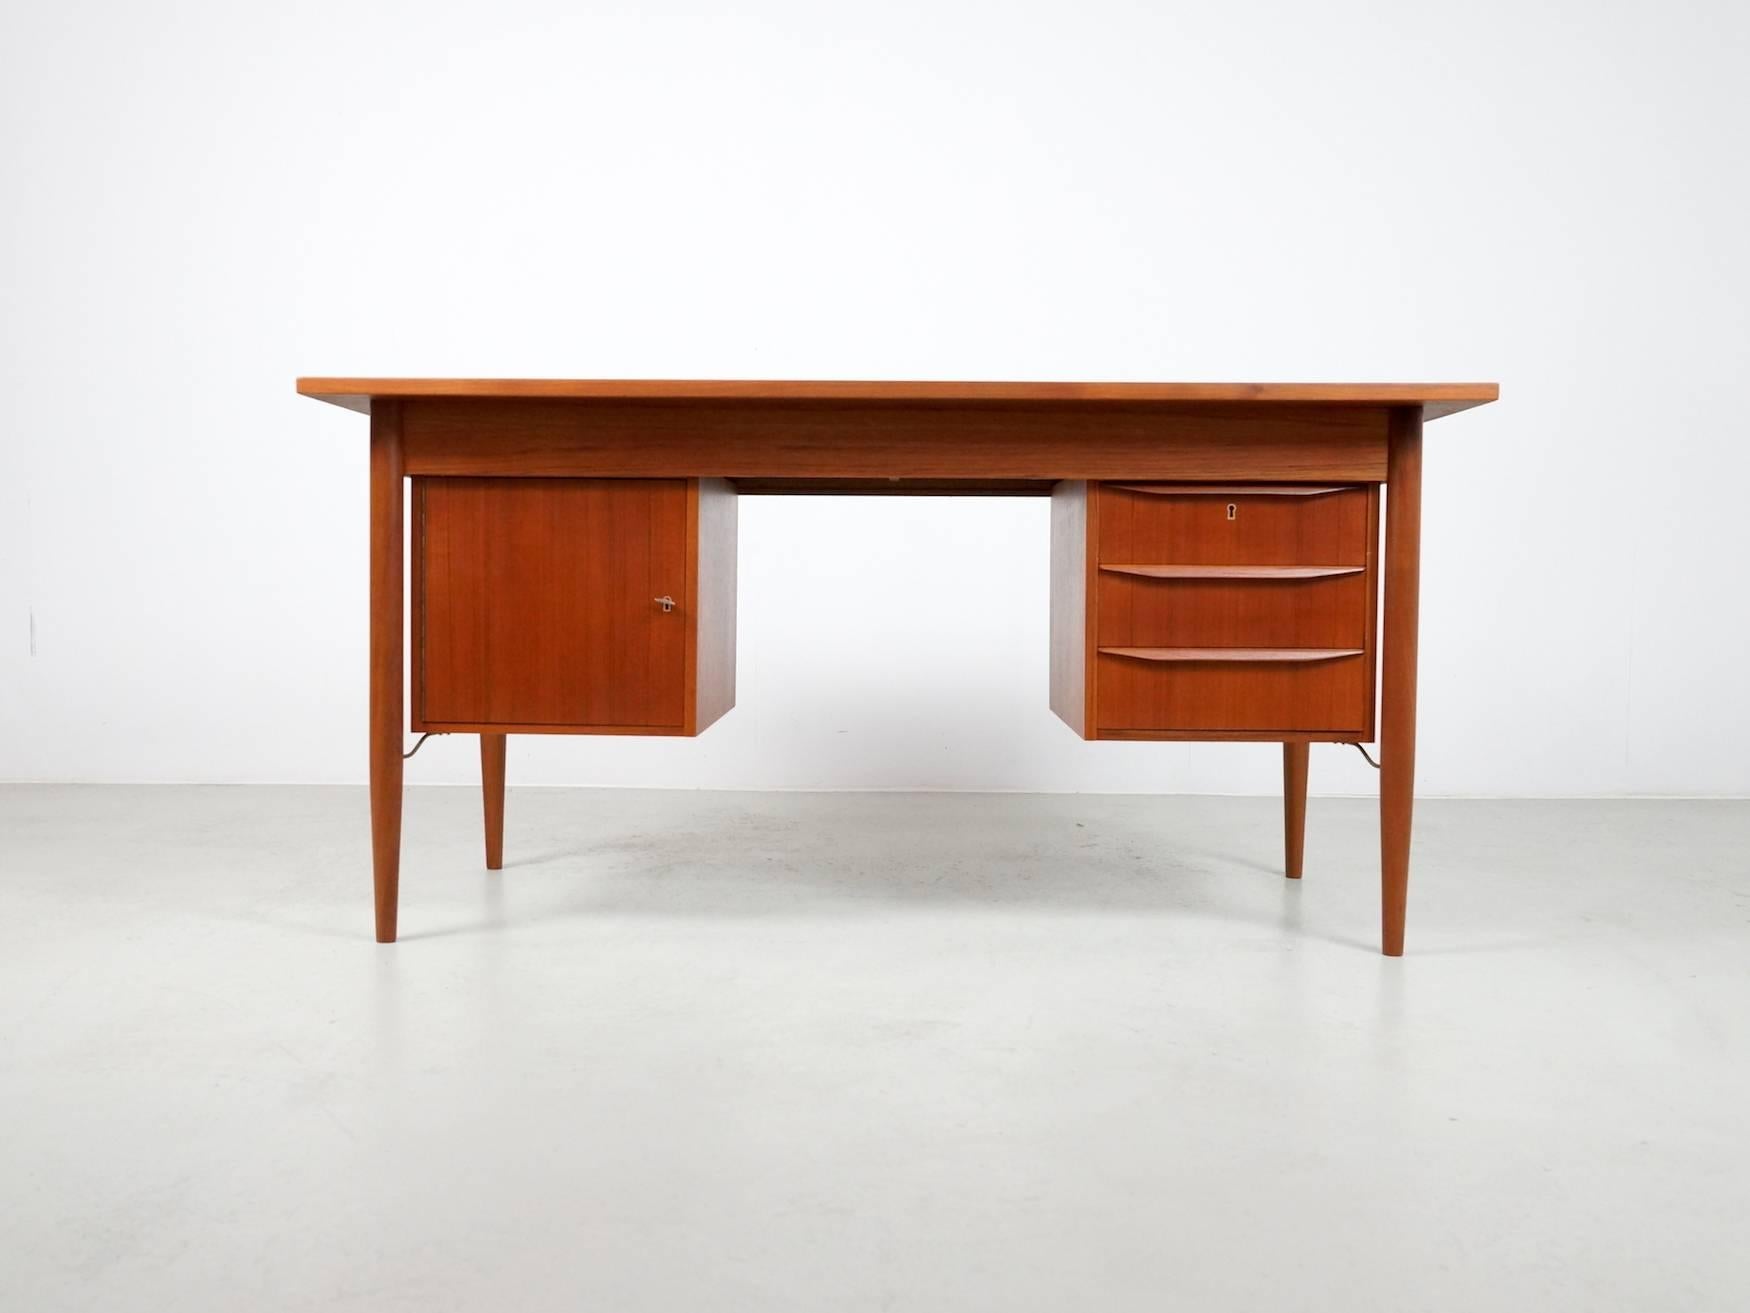 Magnificent freestanding teak desk designed by Gunnar Nielsen and produced by Tibergaard in the 1960s.
Wonderful lines with four drawers on the front and one compartiment. Desk is in perfect condition and has the original key
Gunnar Nielsen